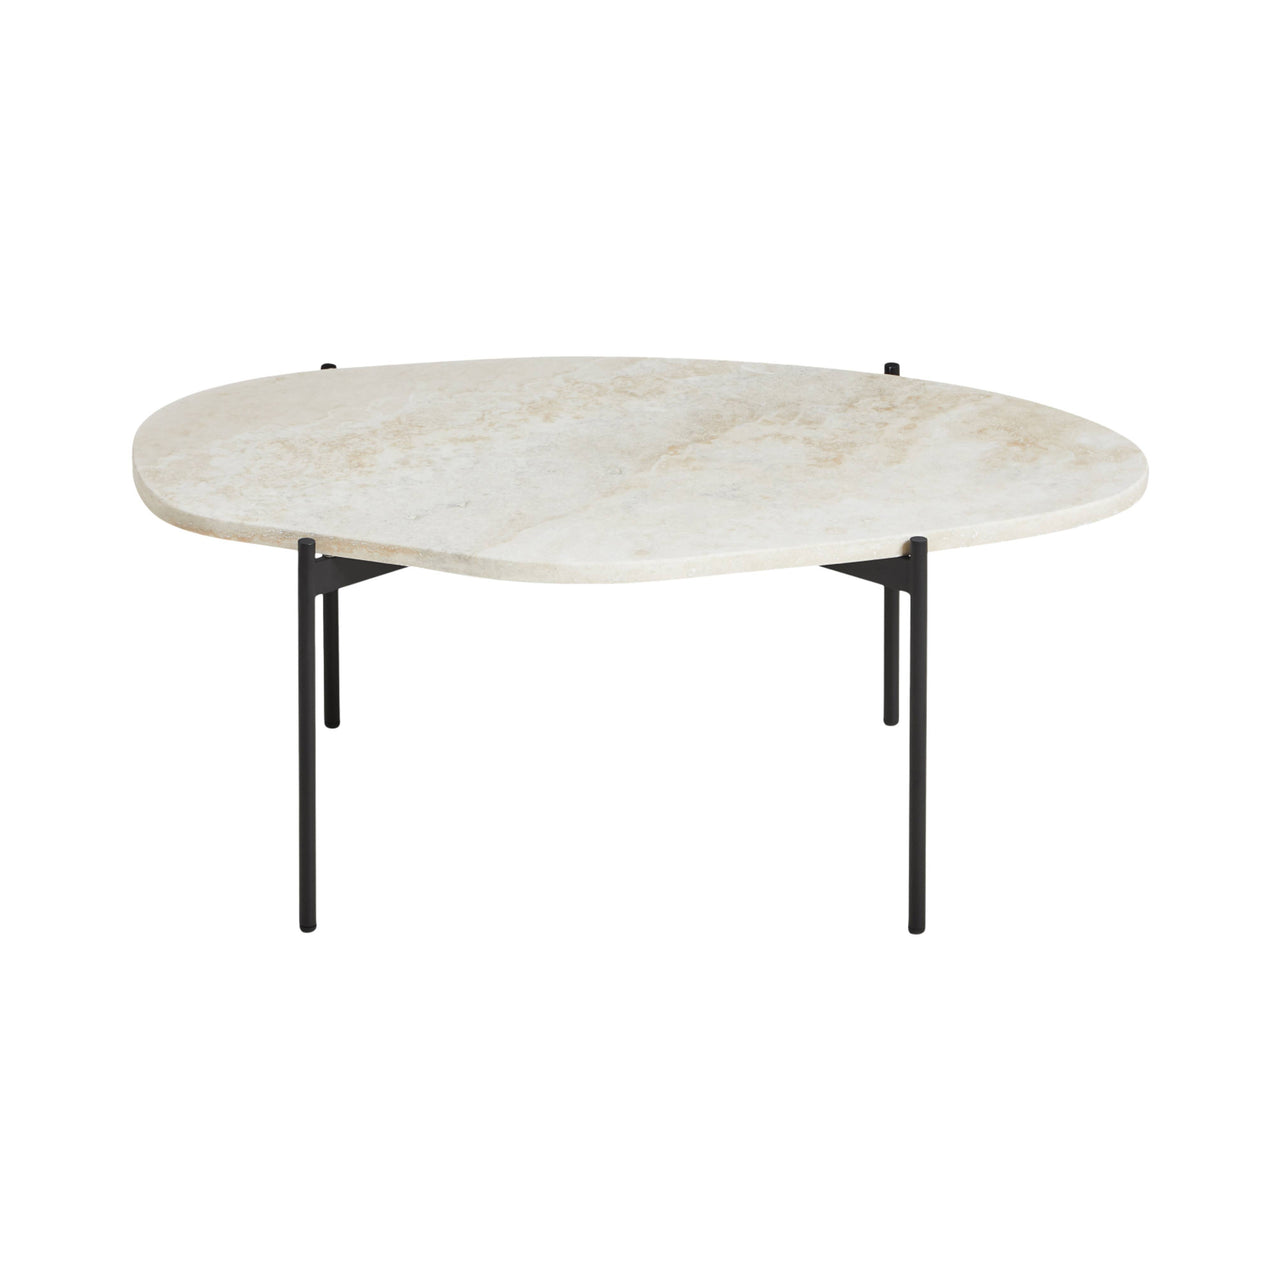 La Terra Occasional Table: Large - 37.4